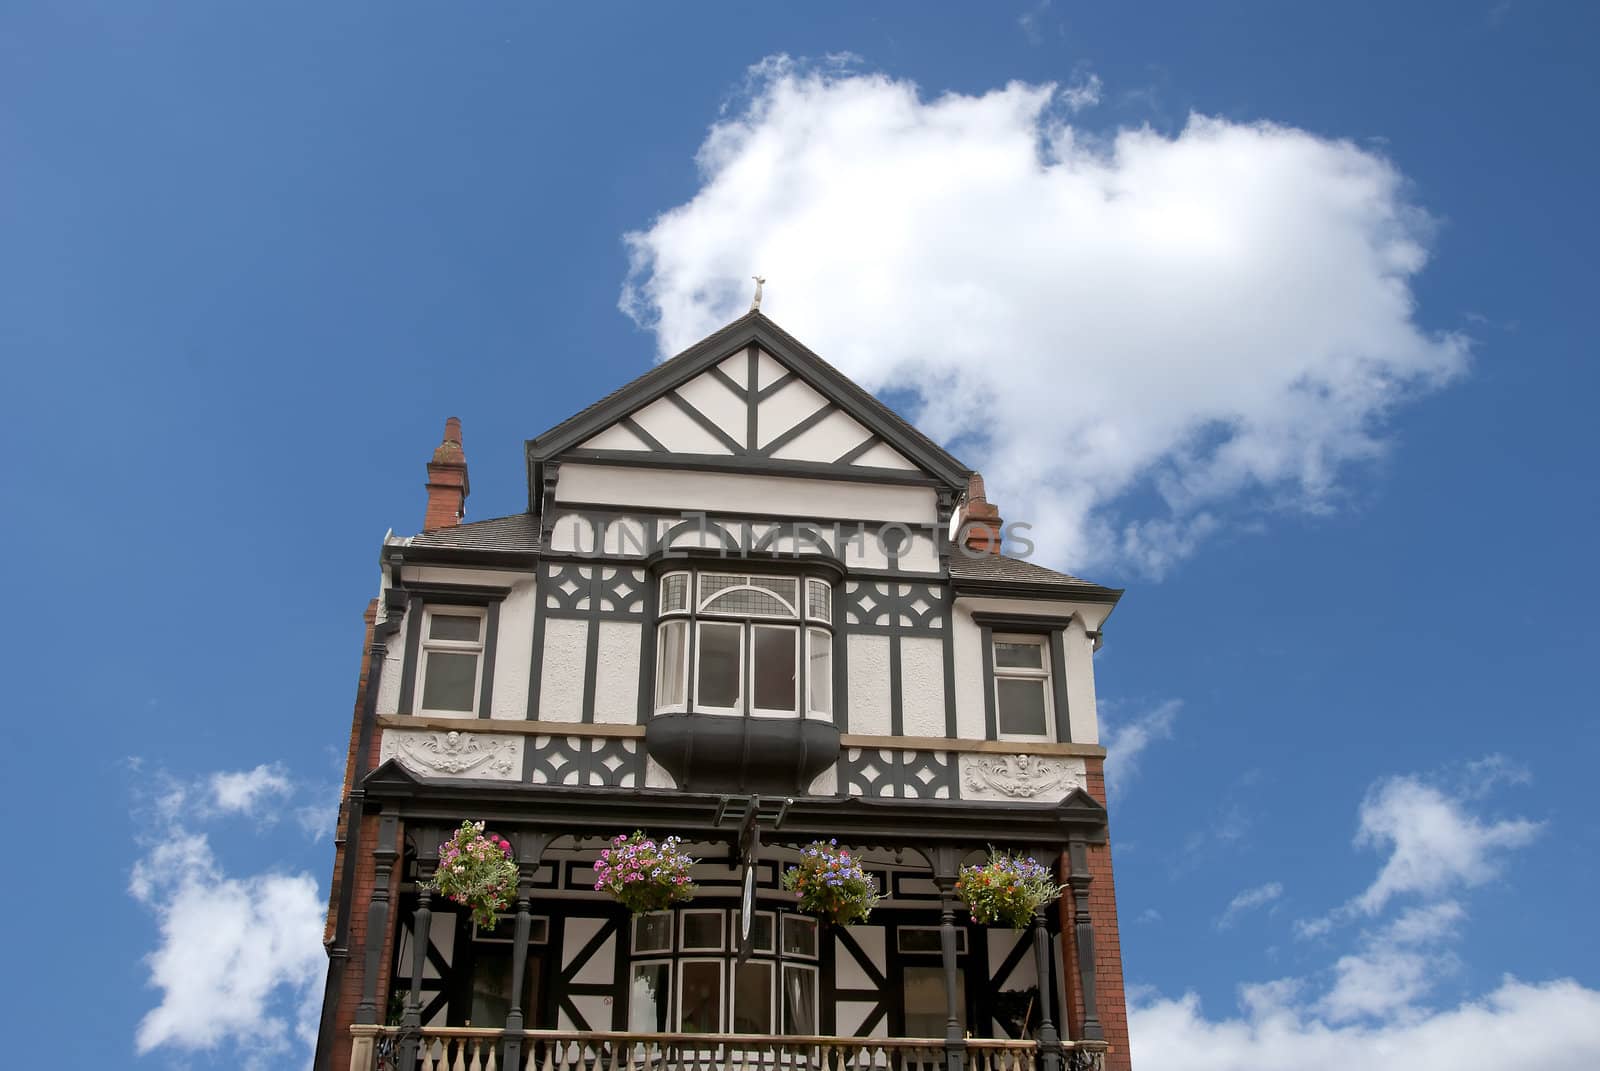 A Half Timbered English Pub with Flower Baskets against a Blue Sky